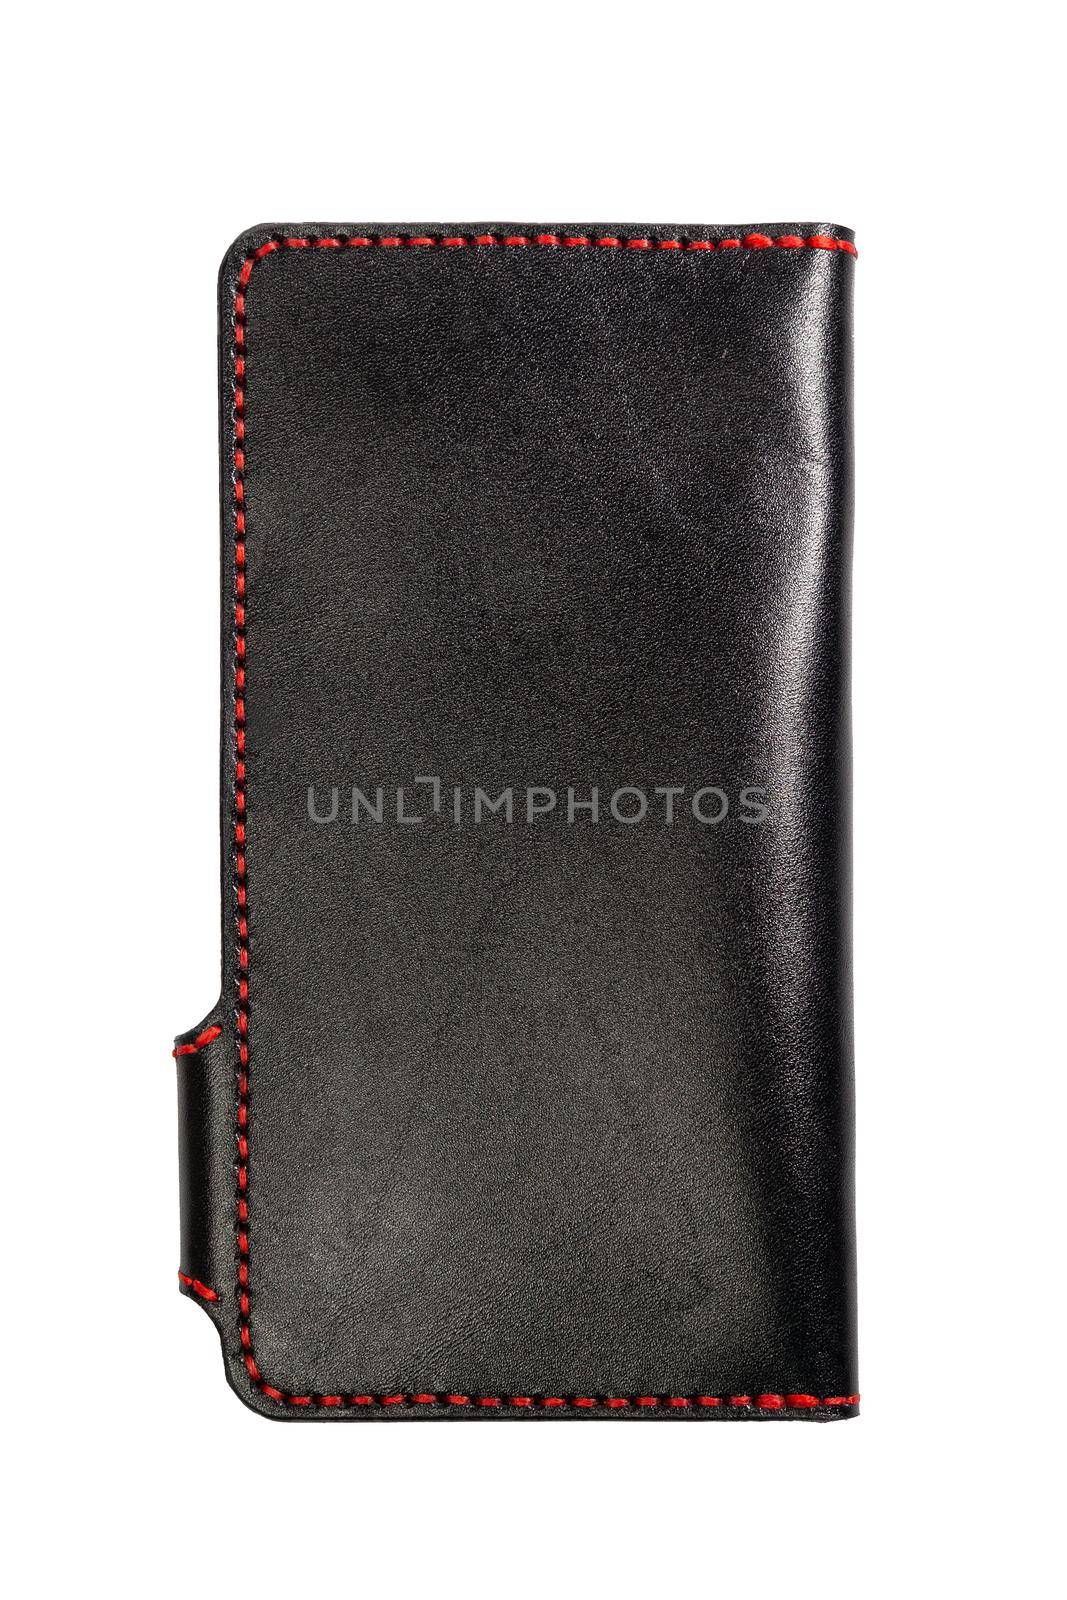 Black natural leather women wallet by BY-_-BY